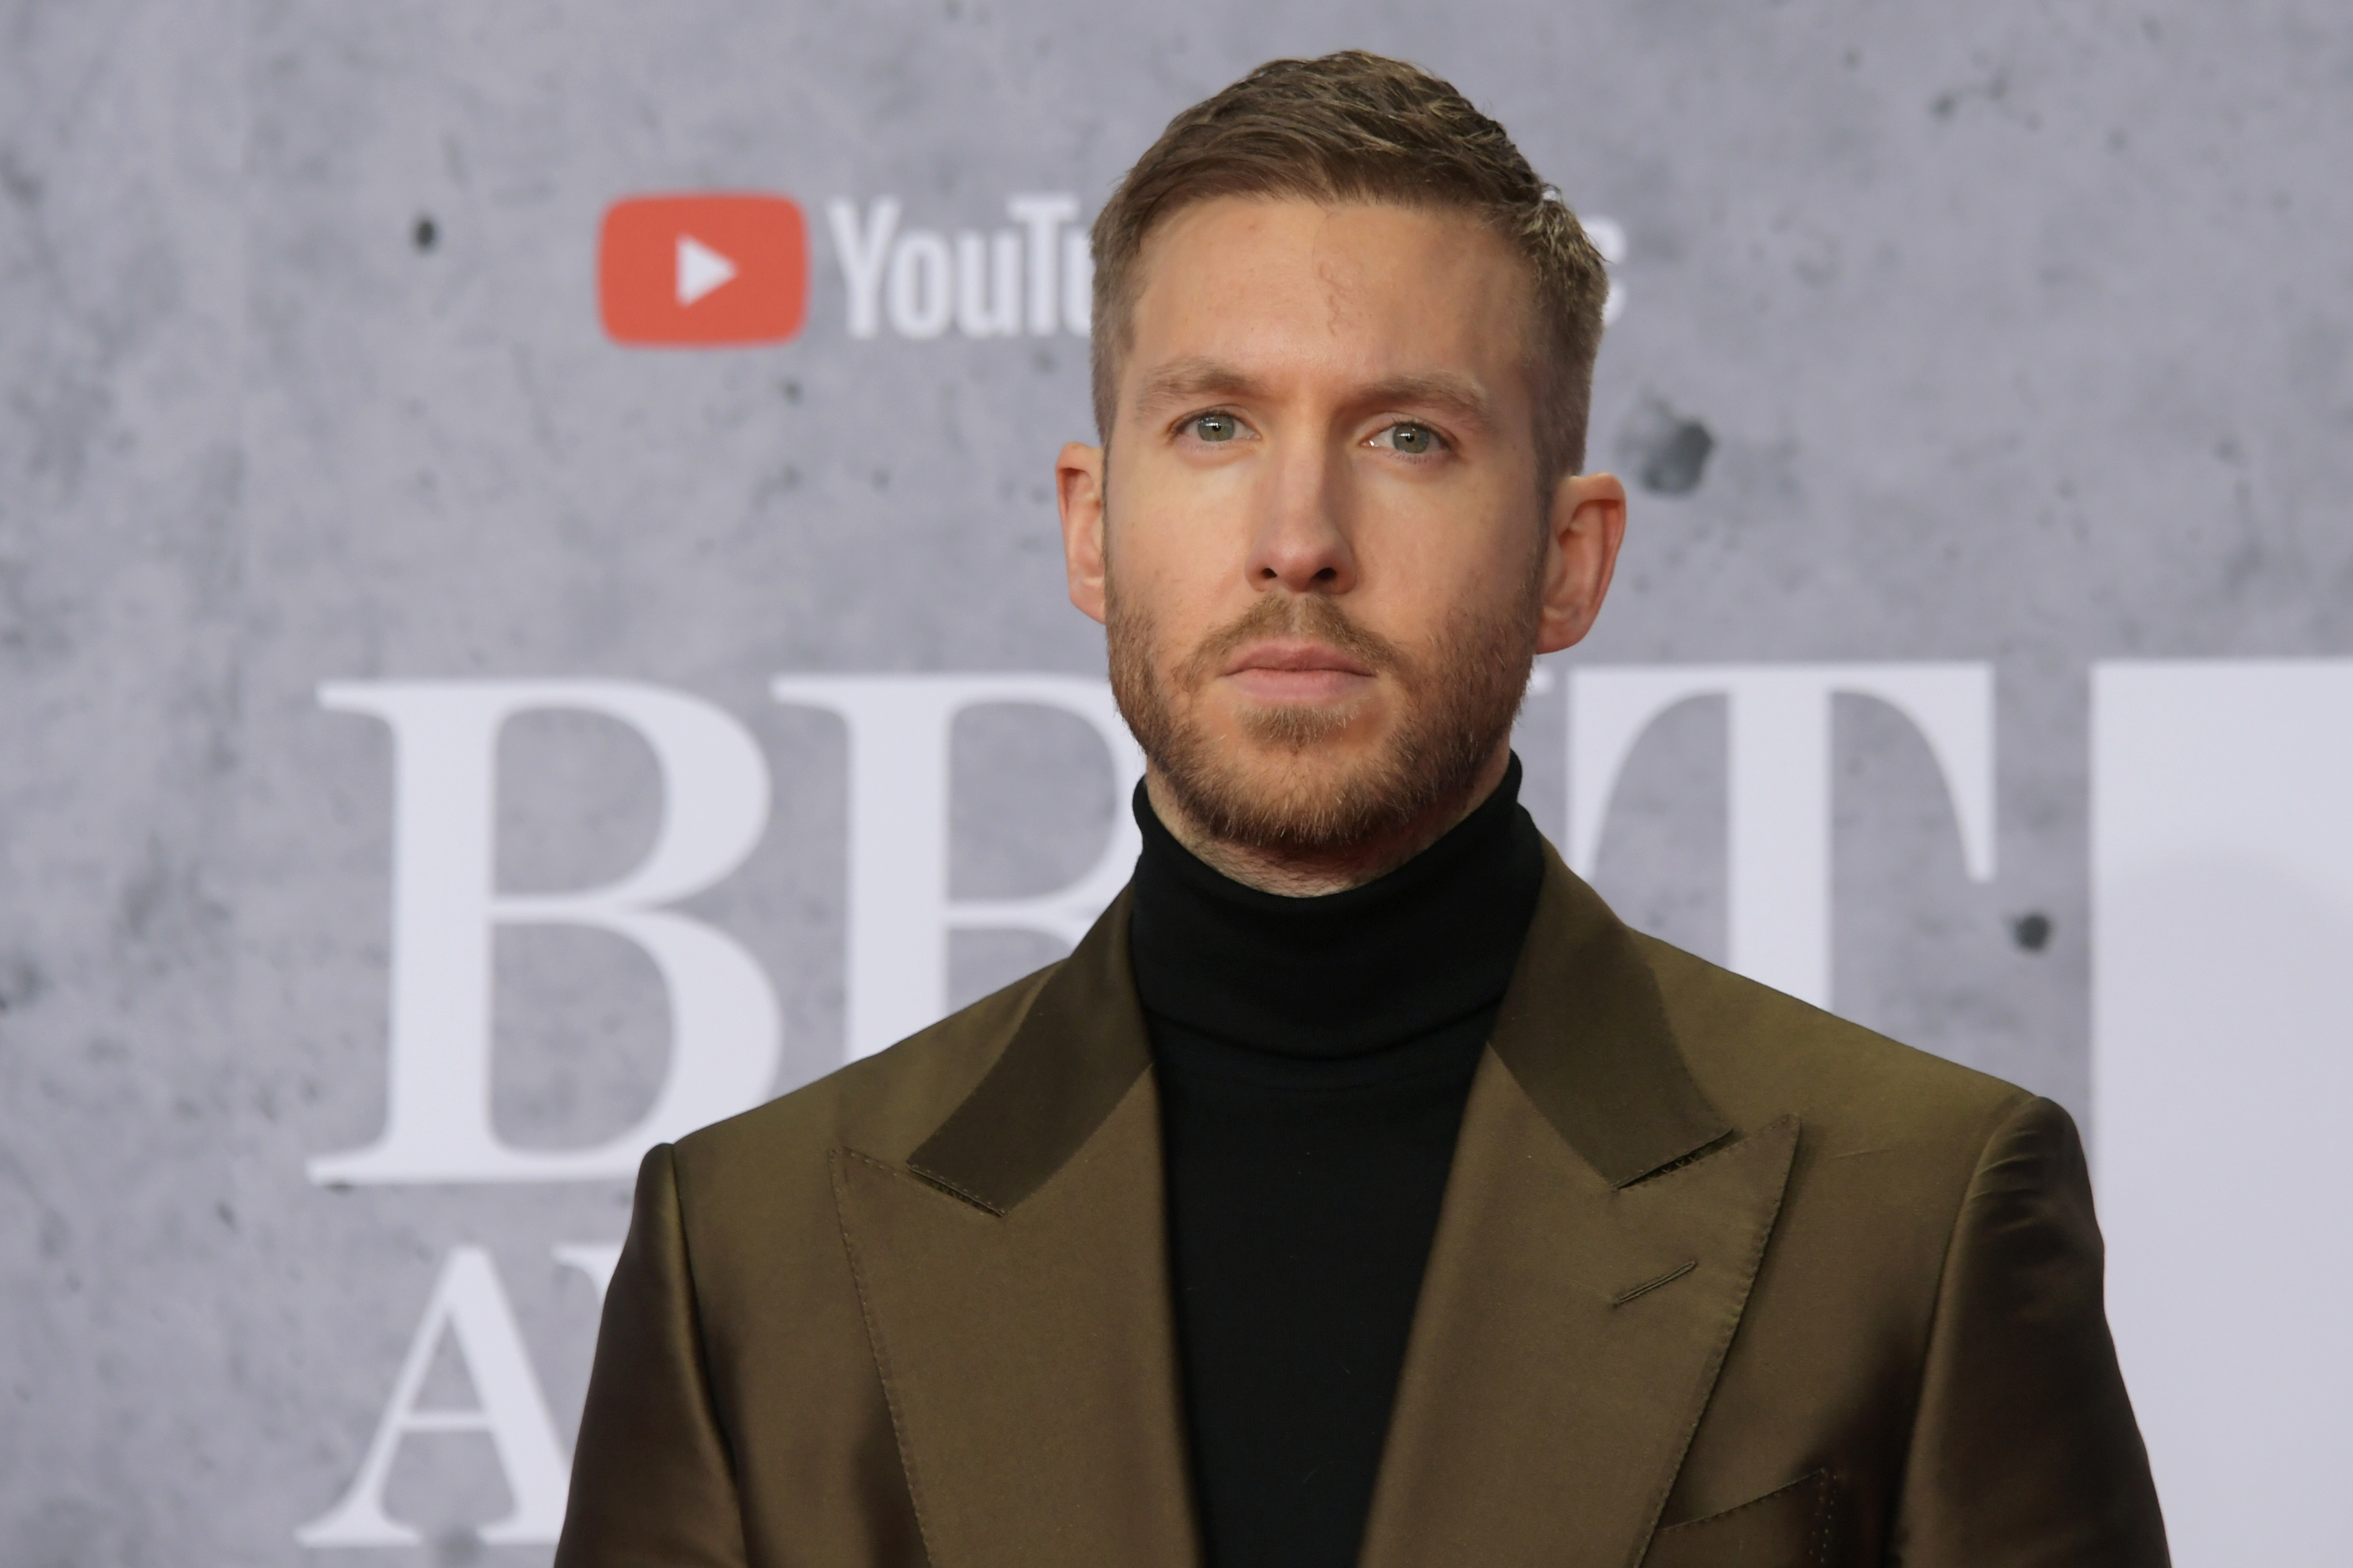 Calvin Harris in a black turtleneck and brown suit jacket standing in front of a backdrop with logos